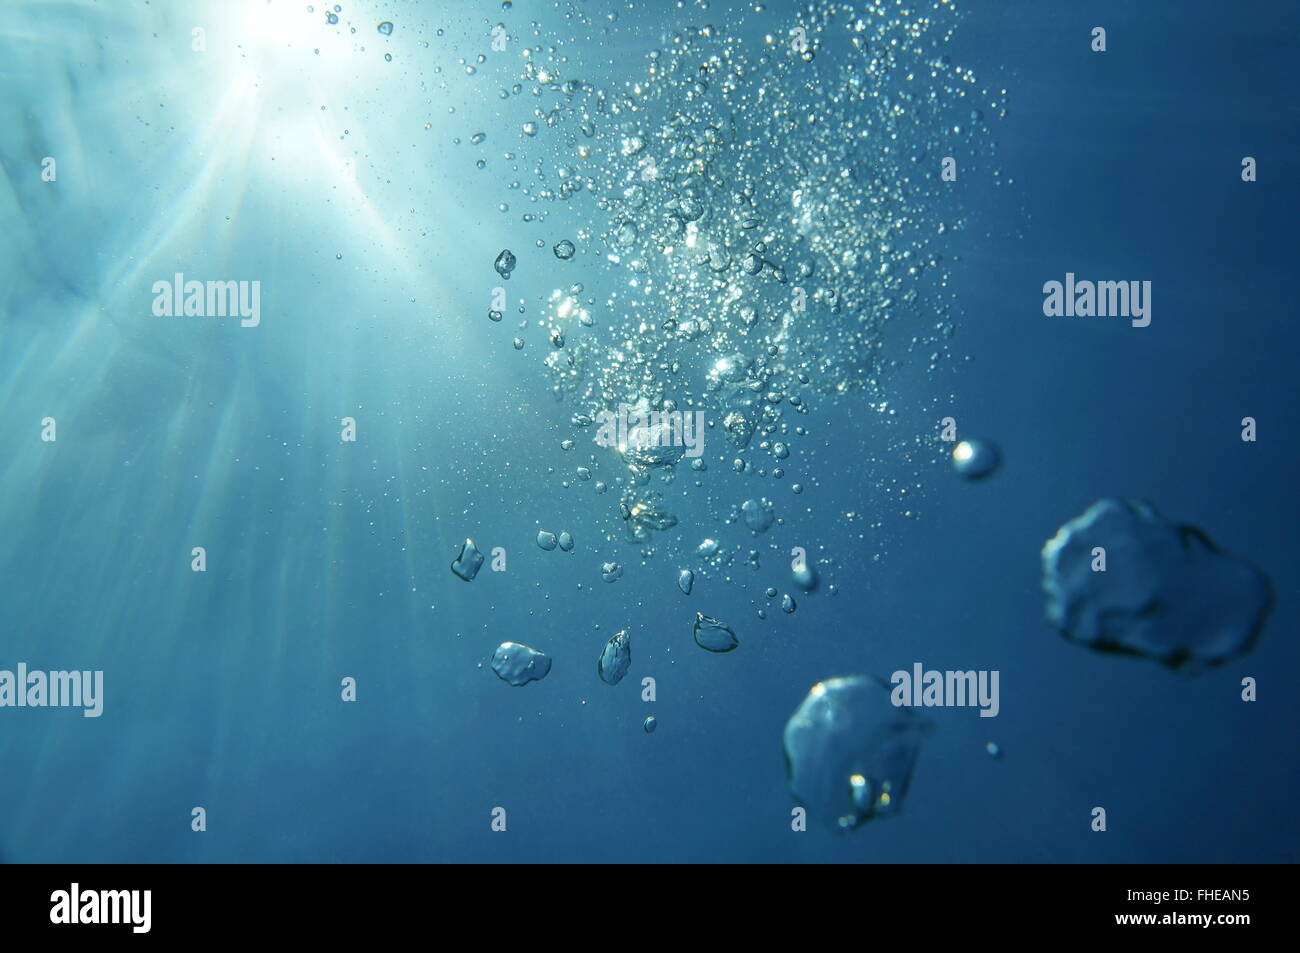 Underwater bubbles with sunlight through water surface, natural scene, Caribbean sea Stock Photo